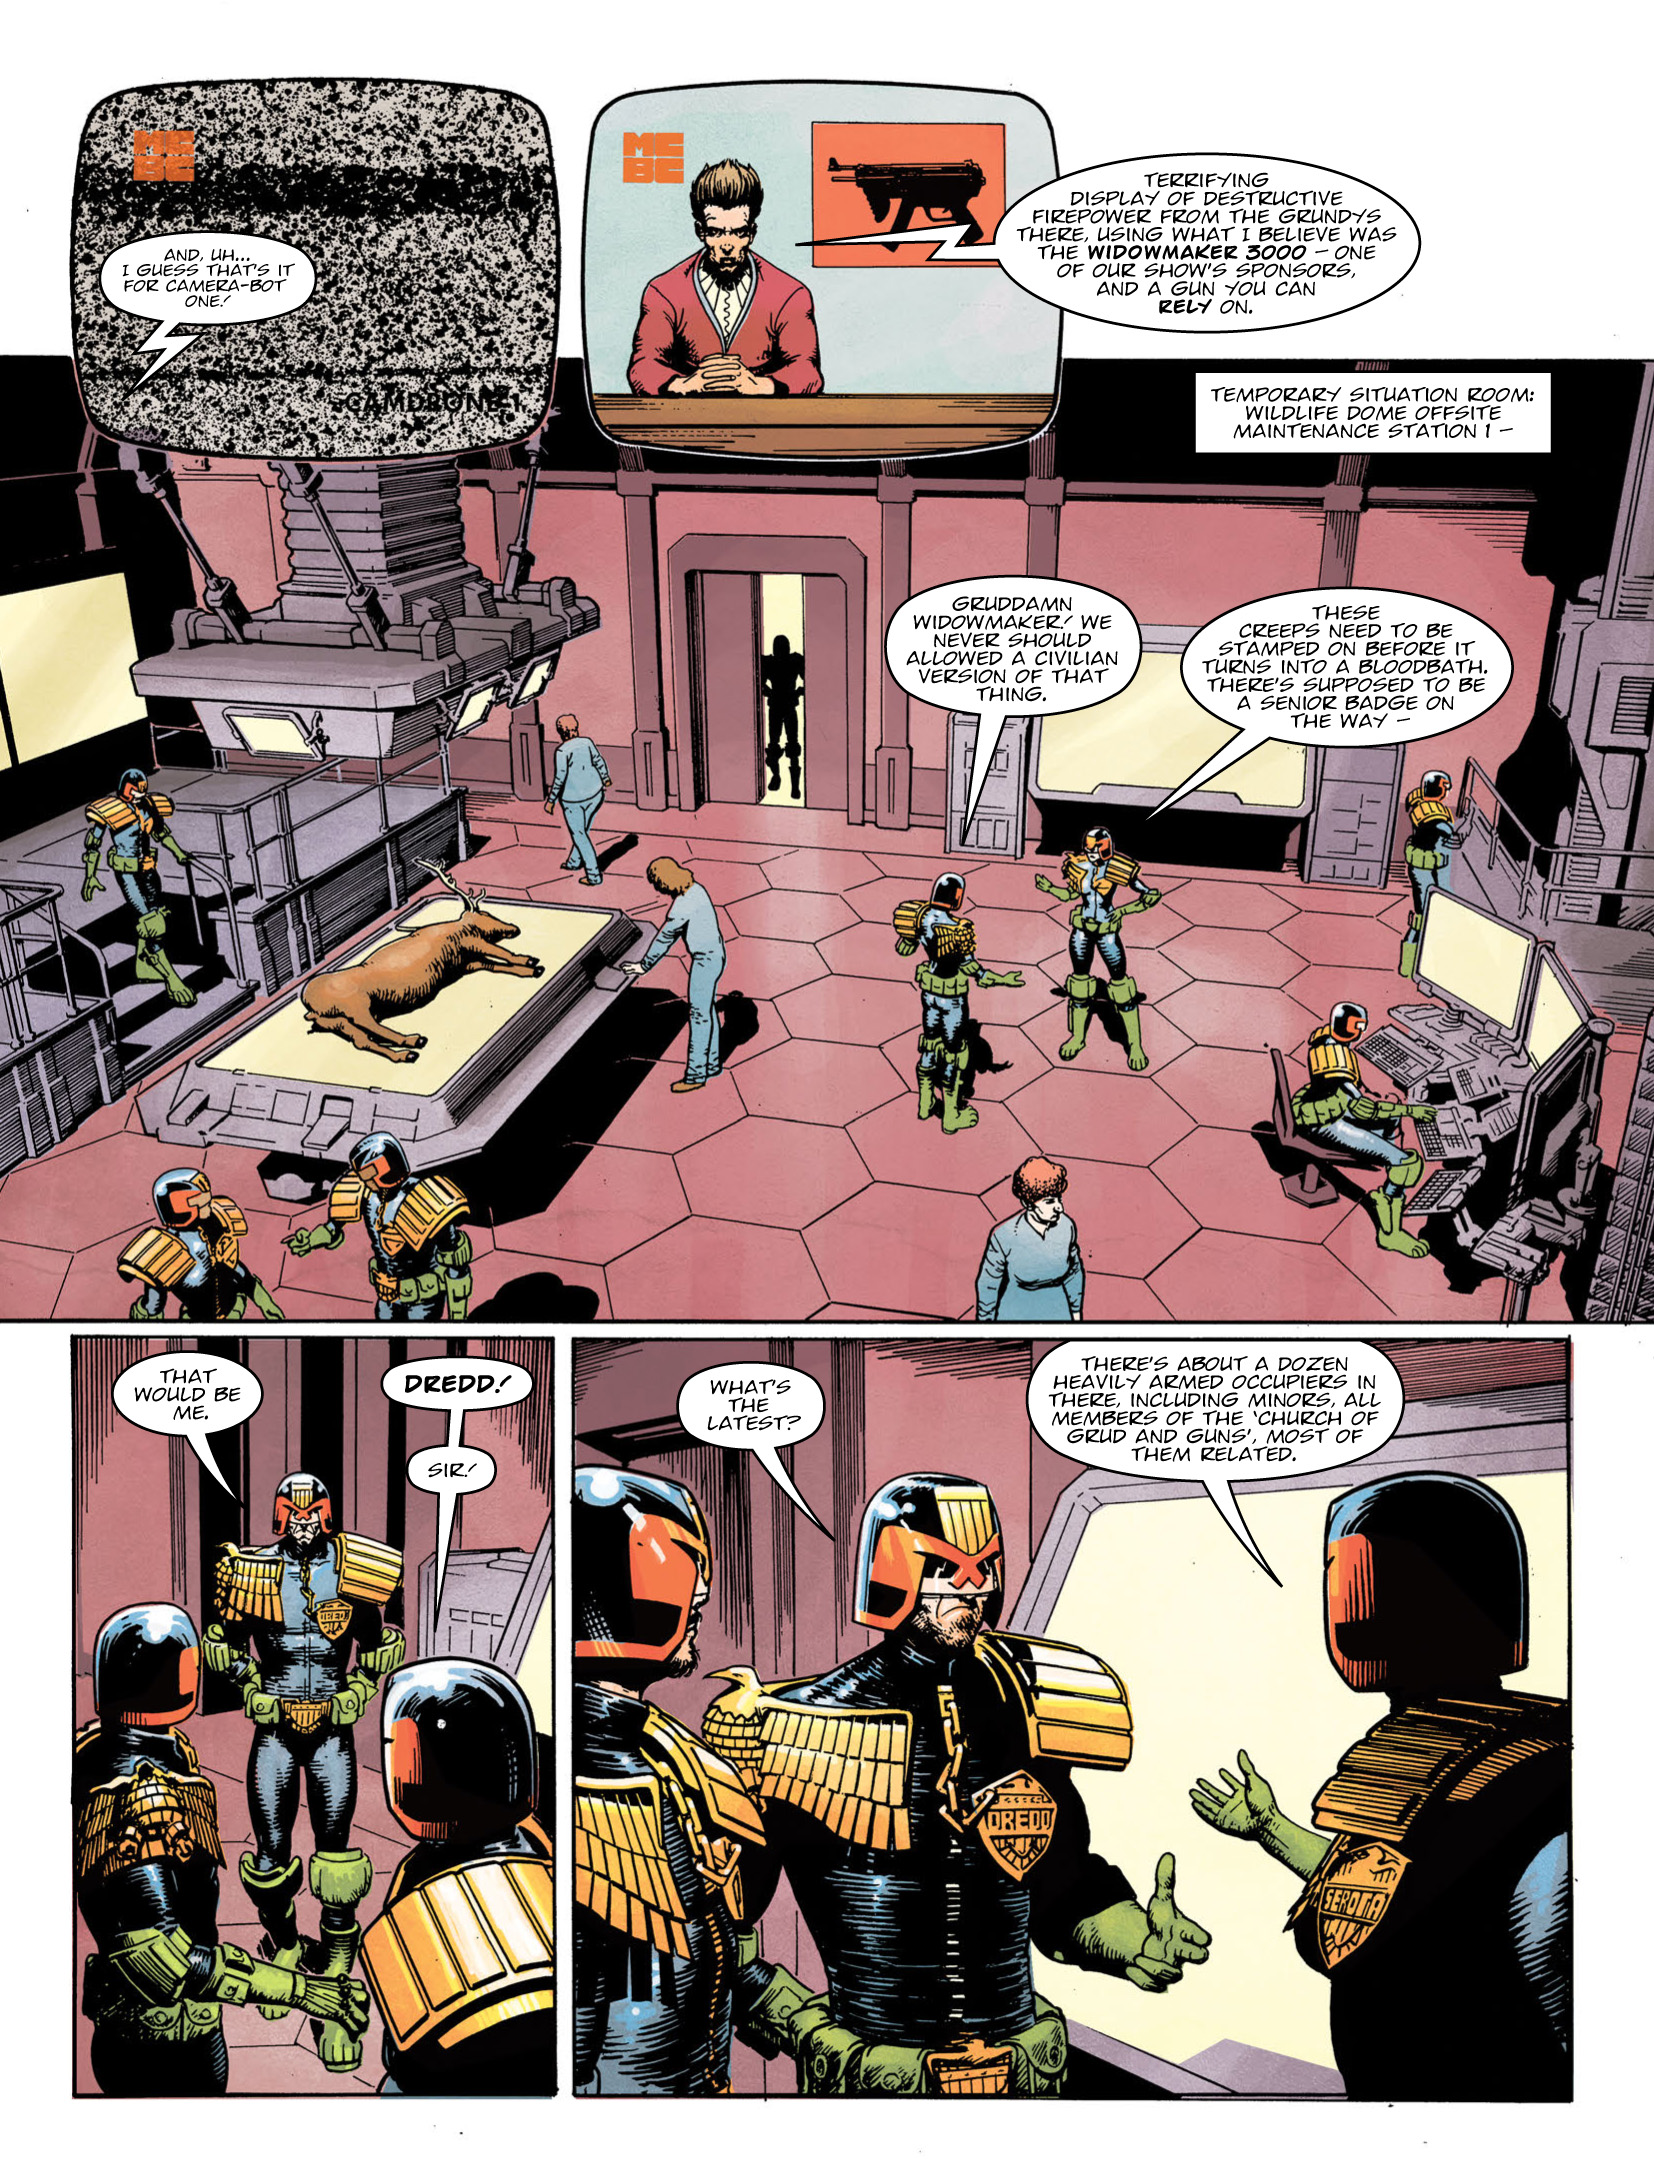 2000 AD: Chapter 2022 - Page 4